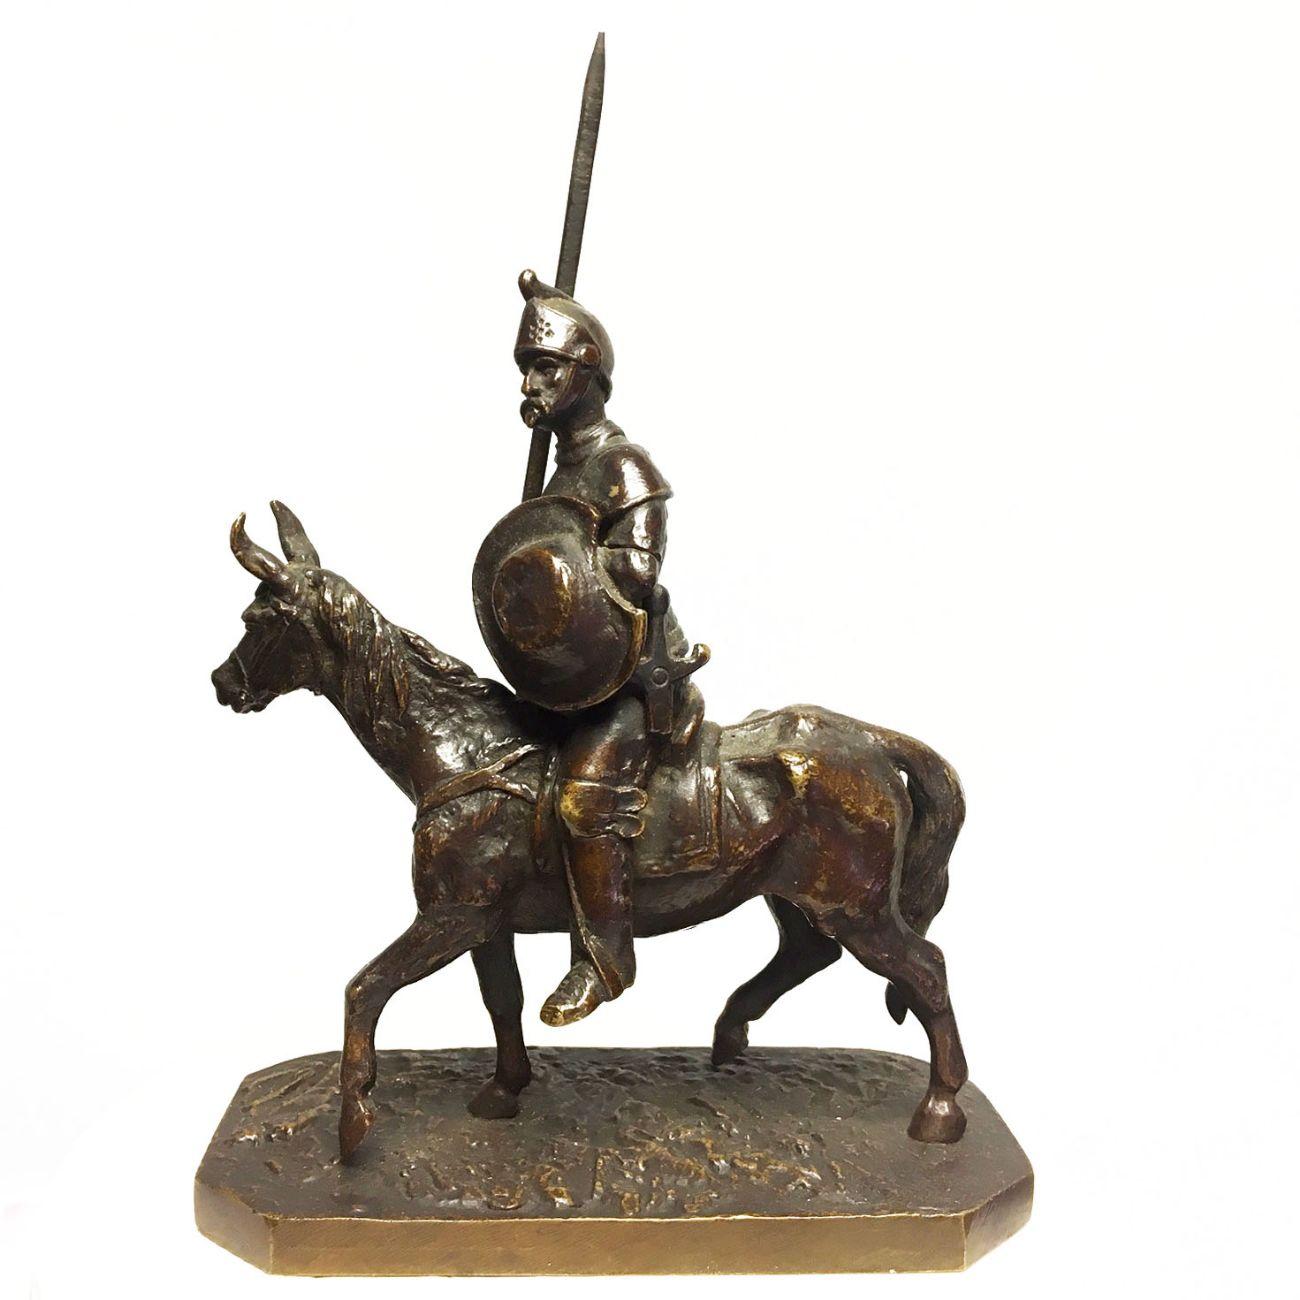 Don Quixote and Sancho Panza in bronze pair by Fratin at the end of the XIXth century characters from the famous novel by Cervantes each riding their proud Rossinante and Rucio mount. Height dimension Don Quixote 17 cm (We think the spike has been